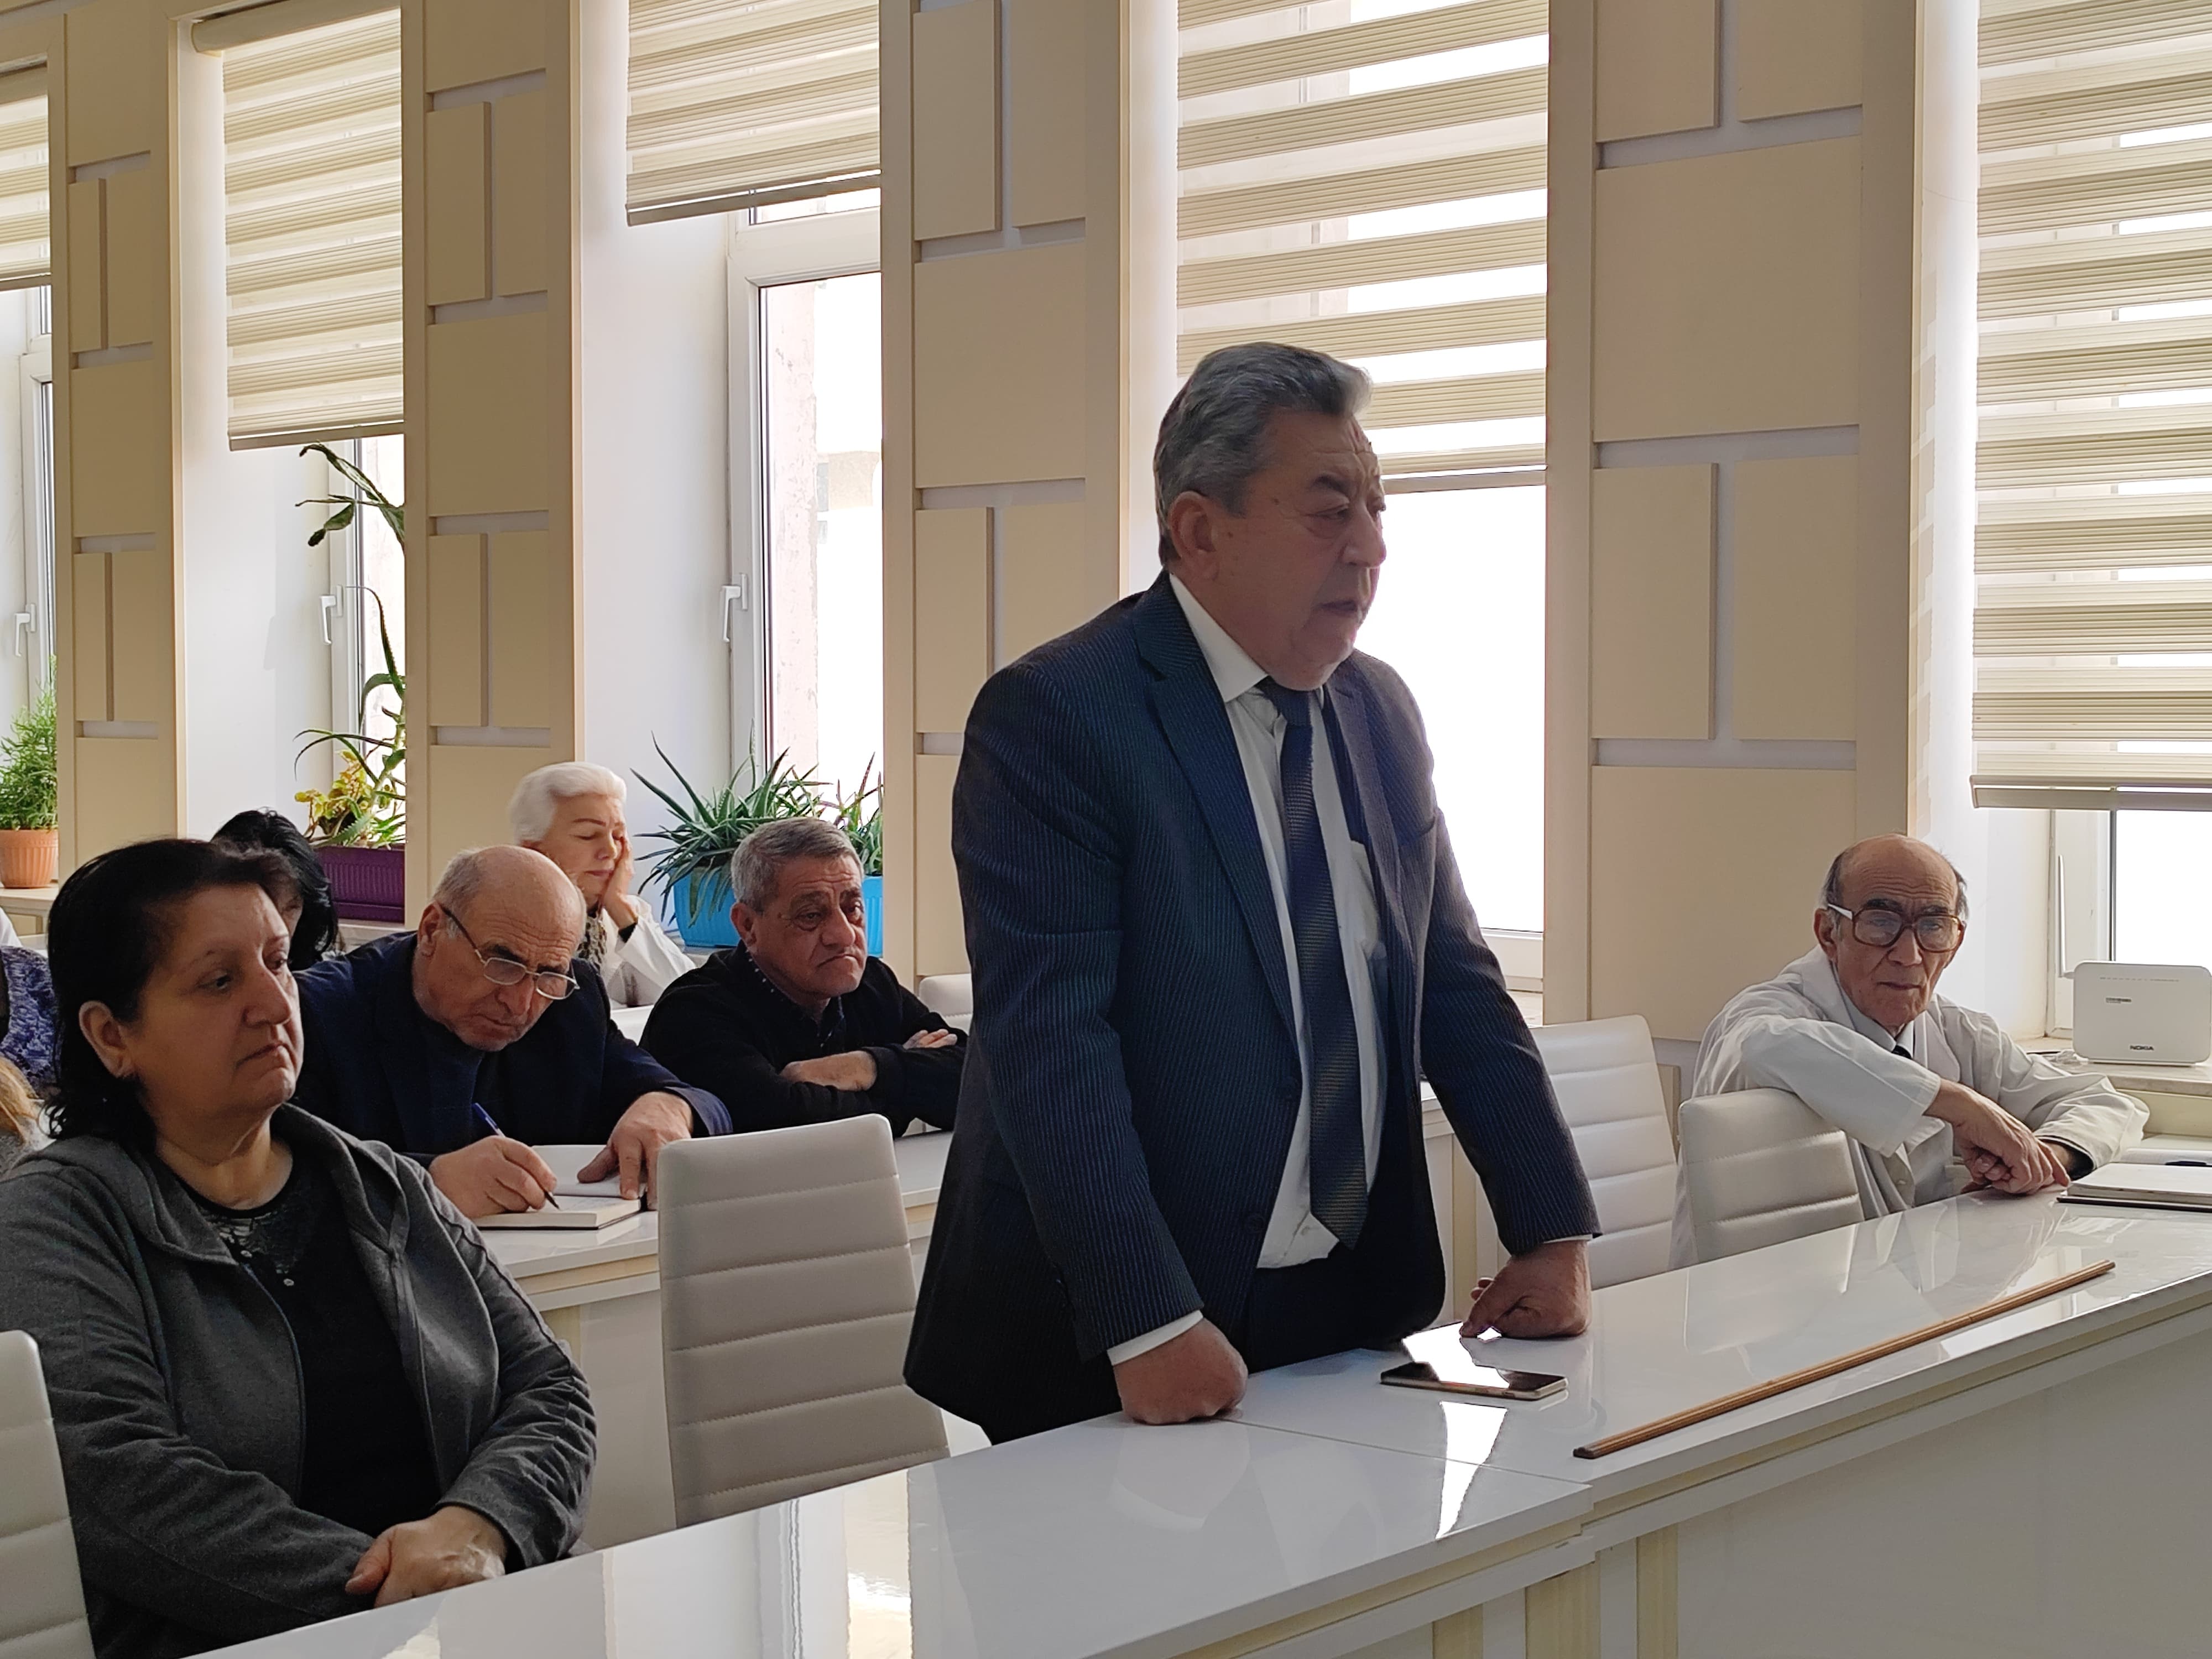 The next meeting of the Scientific Council was held at the Institute of Soil Science and Agrochemistry of the Ministry of Science and Education of the Republic of Azerbaijan.